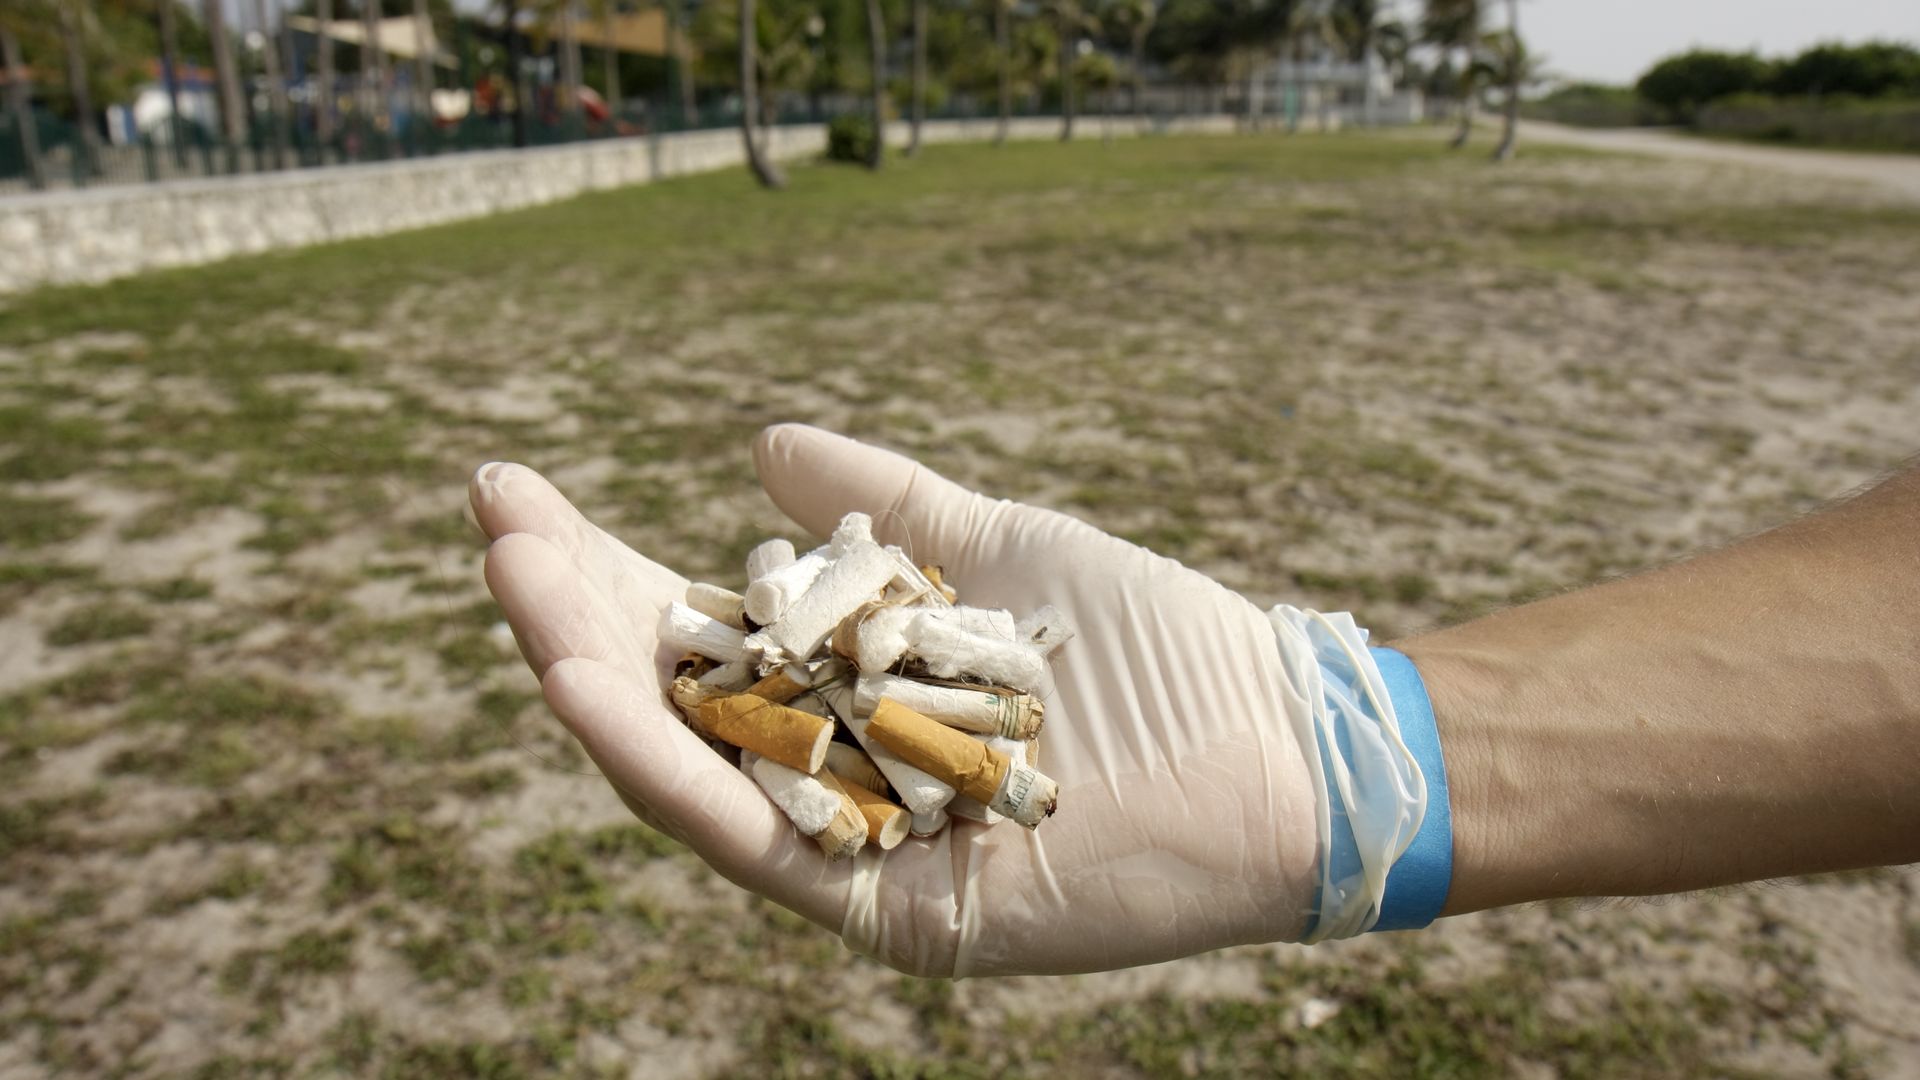 A volunteer holds polluted cigarette butts during a beach cleanup in Miami Beach.